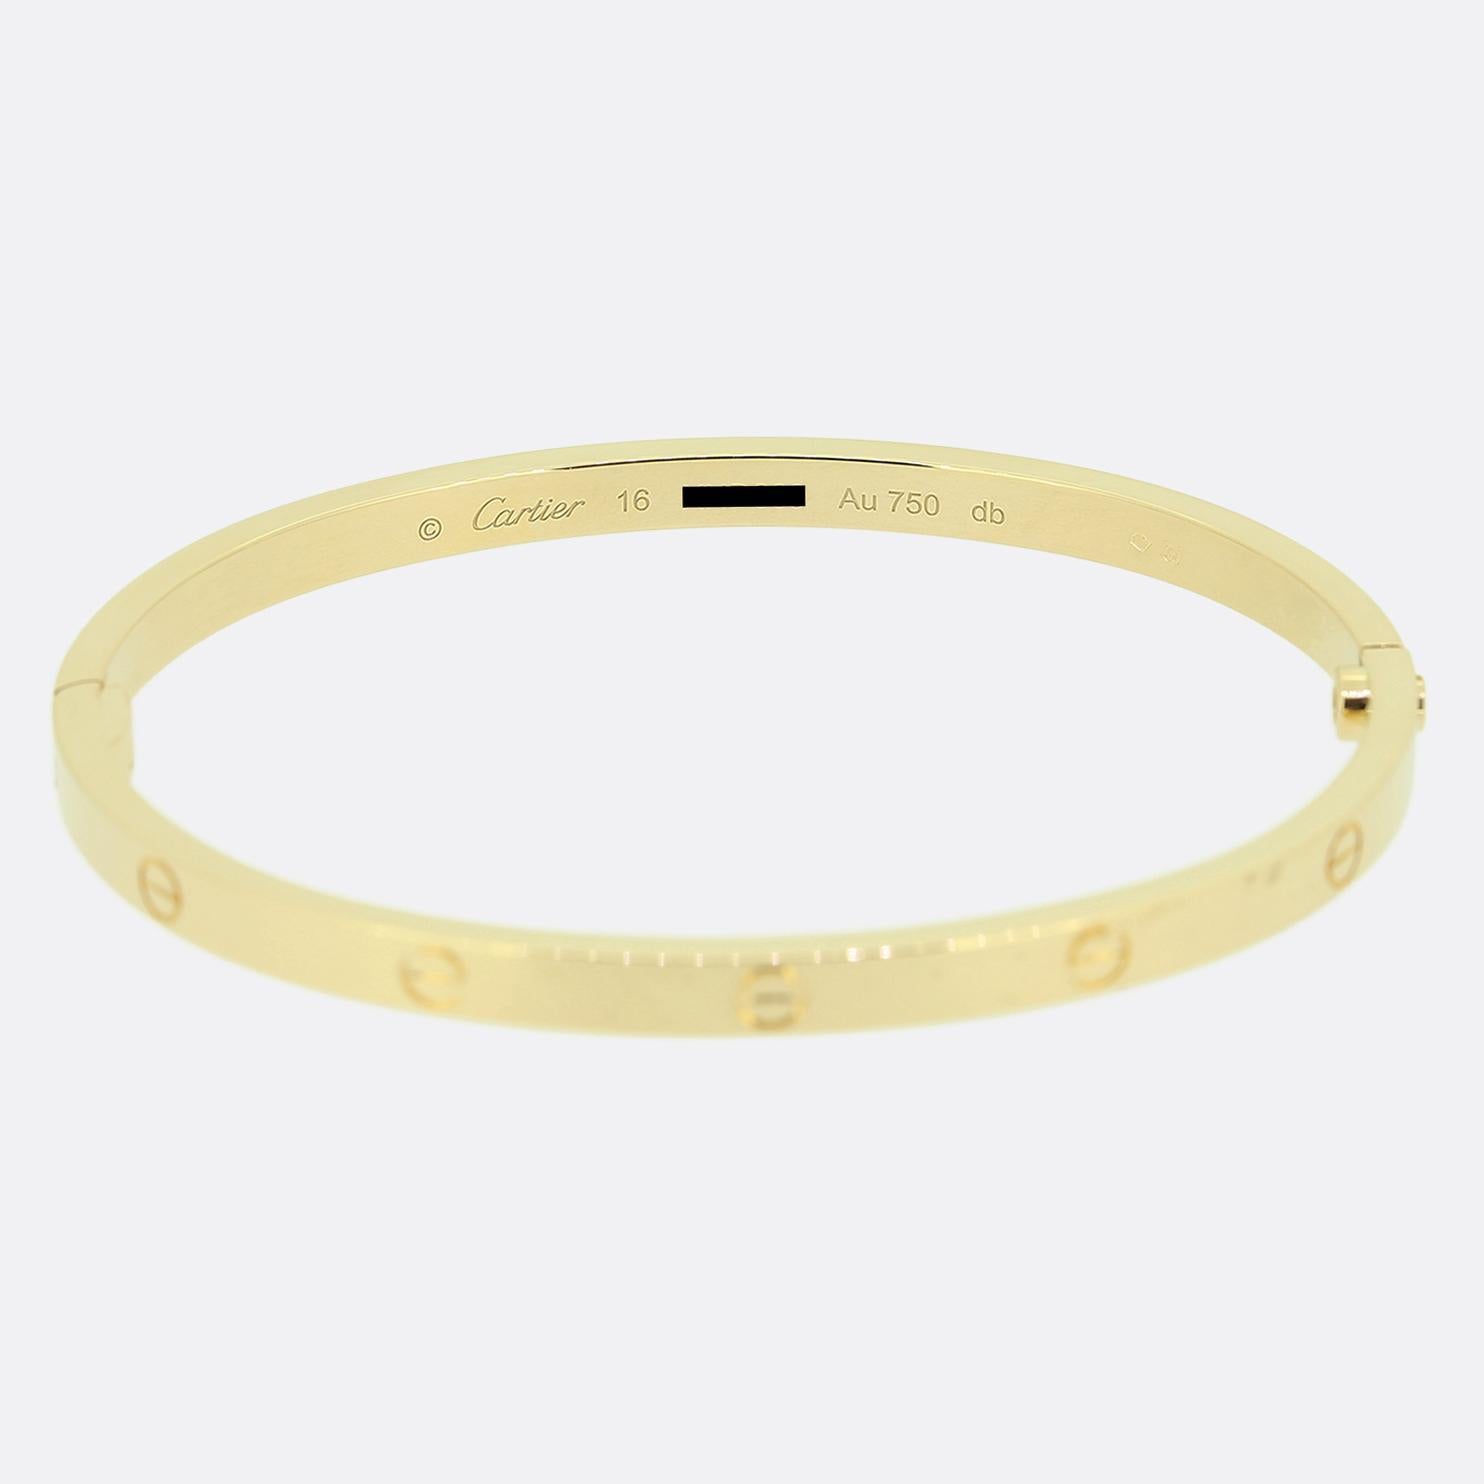 Here we have an 18ct yellow gold bangle from the world renowned luxury jewellery house of Cartier. This bangle forms part of the LOVE collection and features the iconic screw motif around the entire outer edge. This is the slimmer/thin model with a